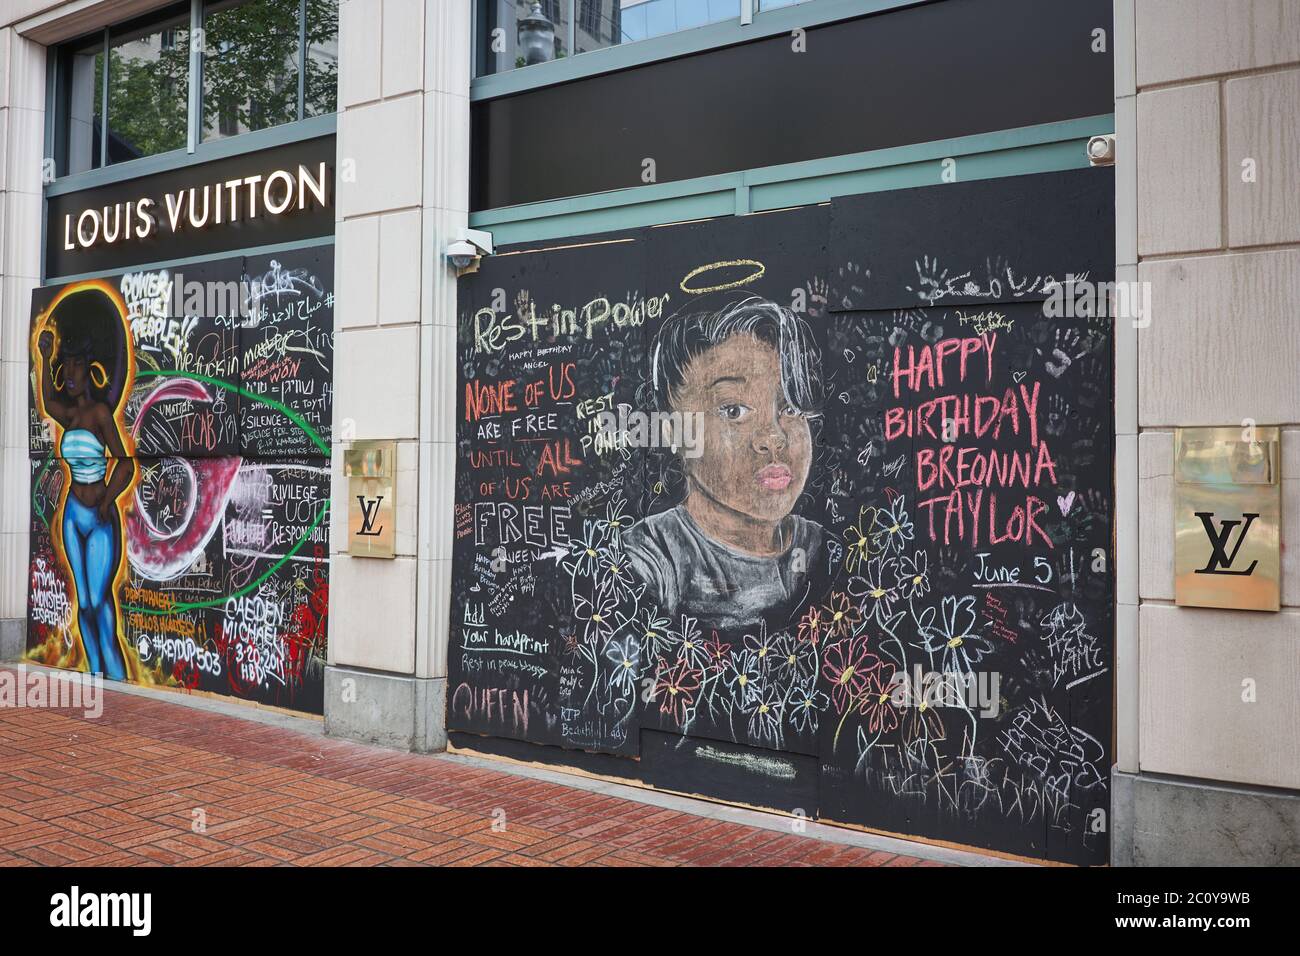 The boarded-up Louis Vuitton store in Pioneer Place in downtown Portland, Oregon, which has become canvases for protest, seen on Friday, Jun 12, 2020. Stock Photo